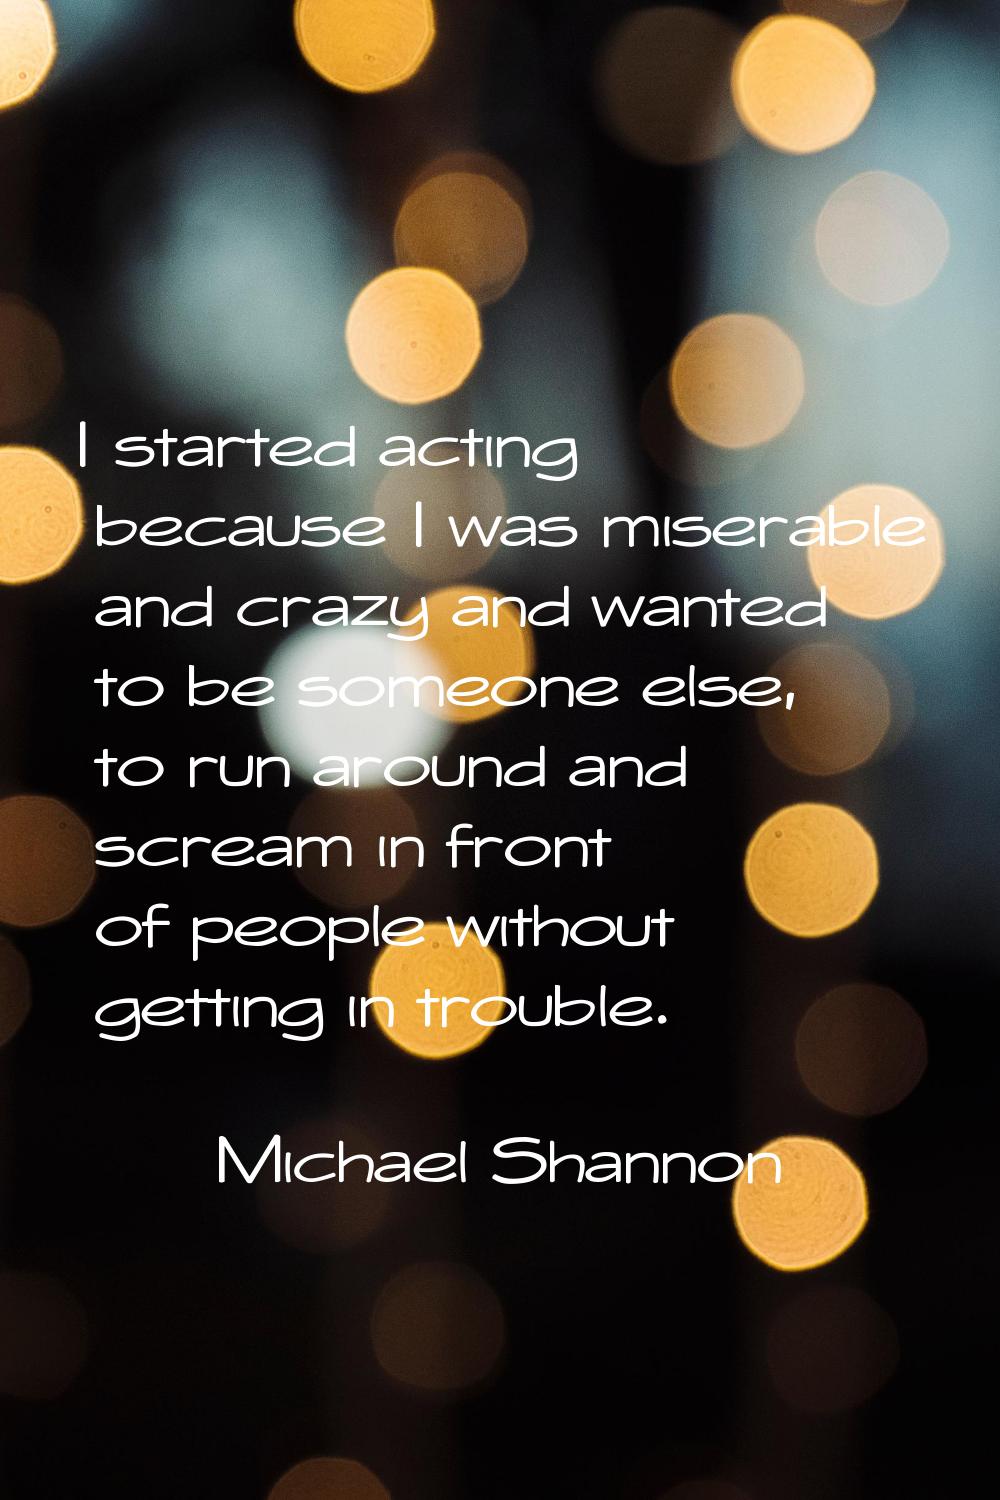 I started acting because I was miserable and crazy and wanted to be someone else, to run around and